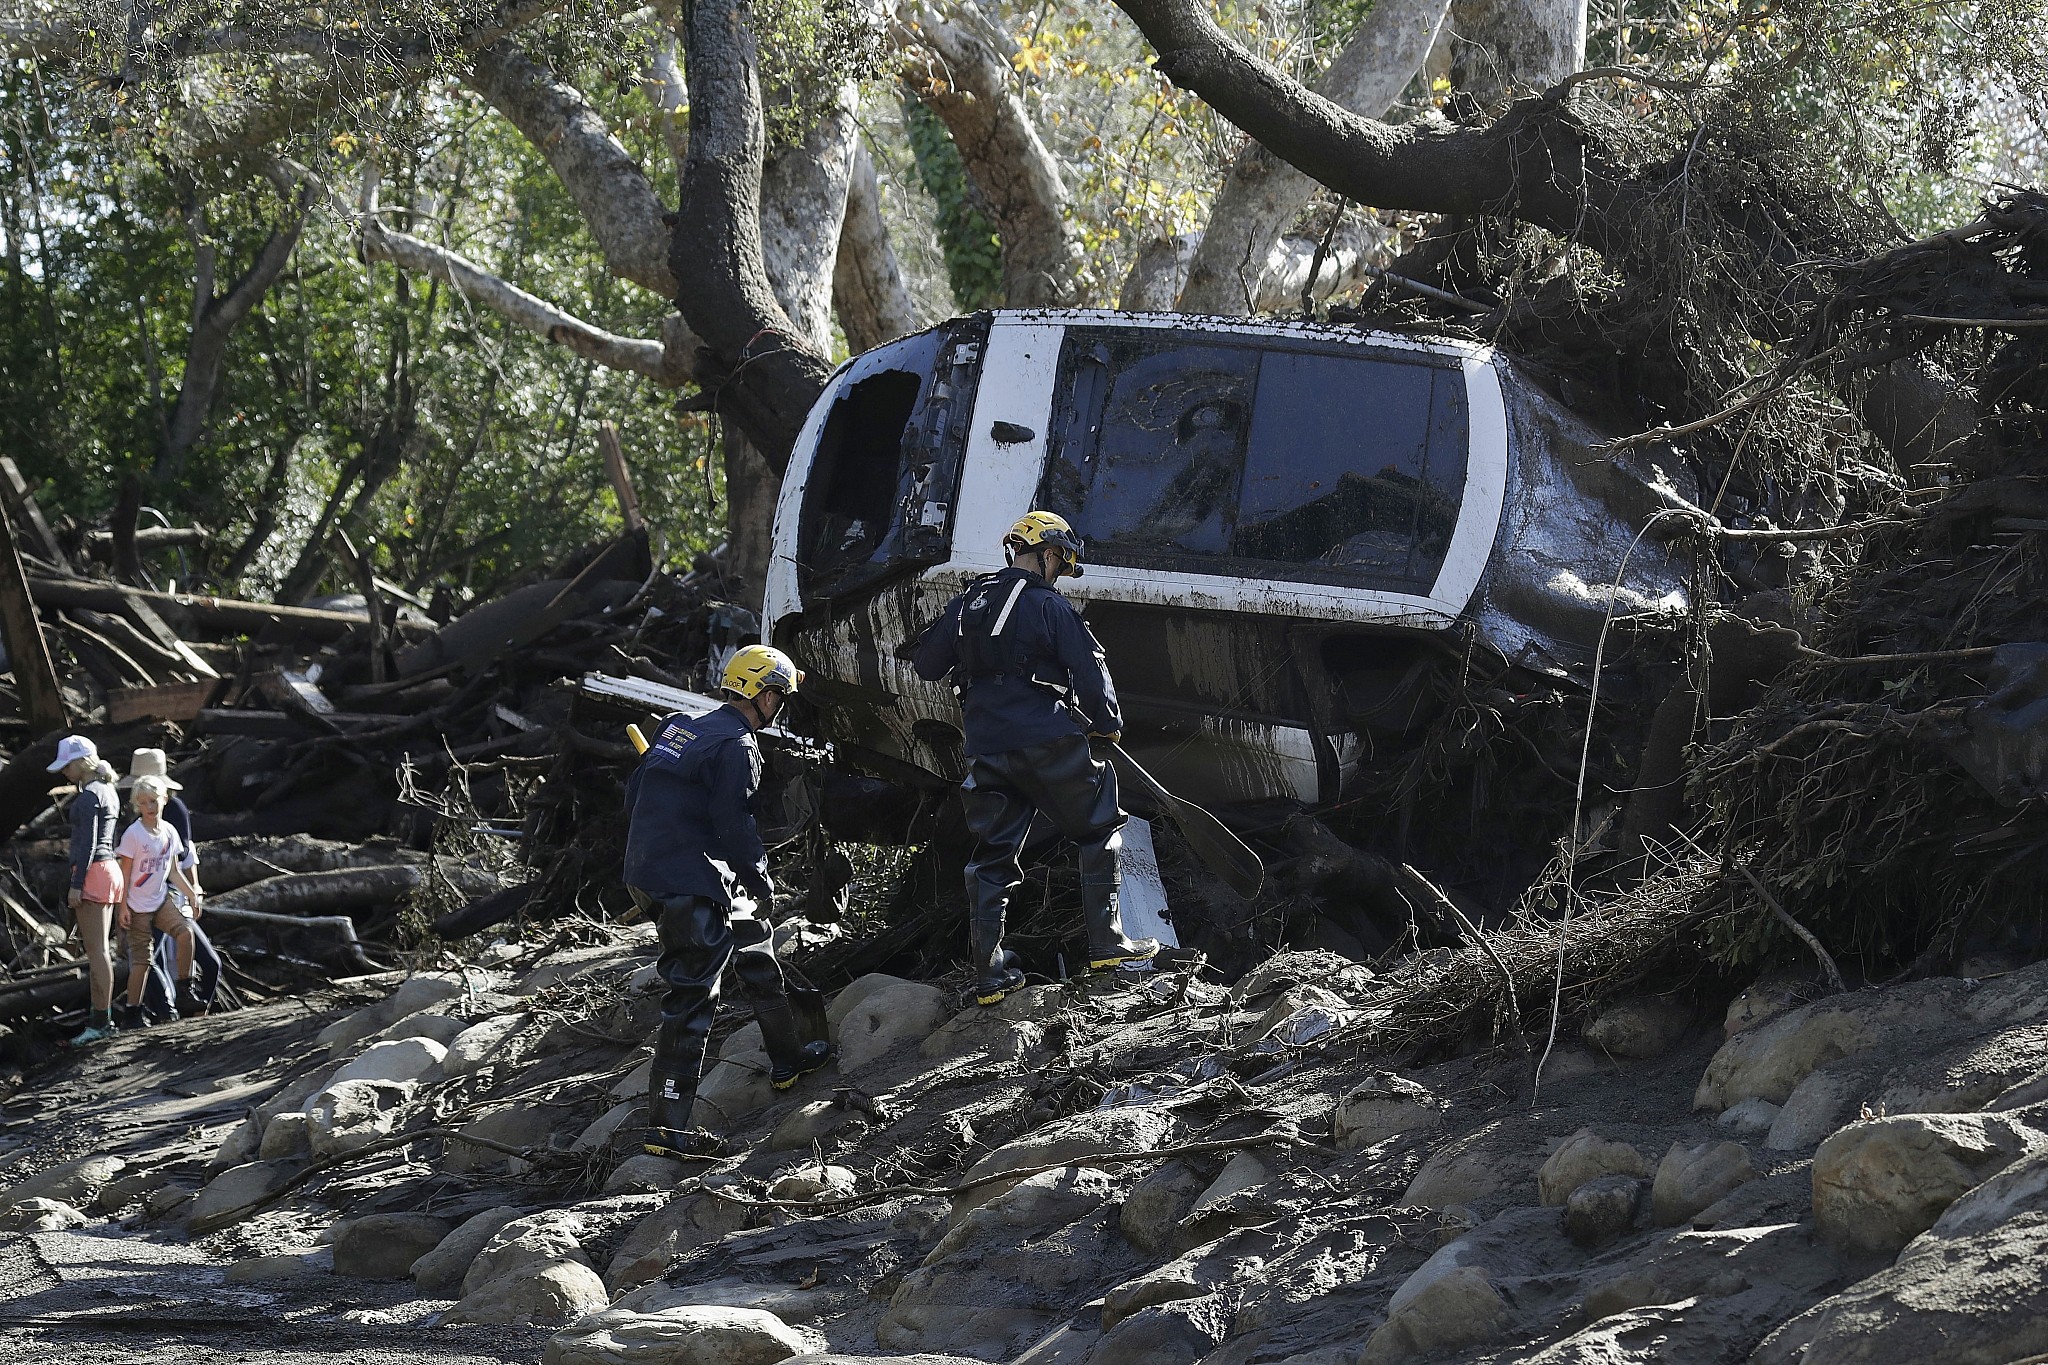 Thousands Stranded, 1 Dead in California Mudslides - ABC News